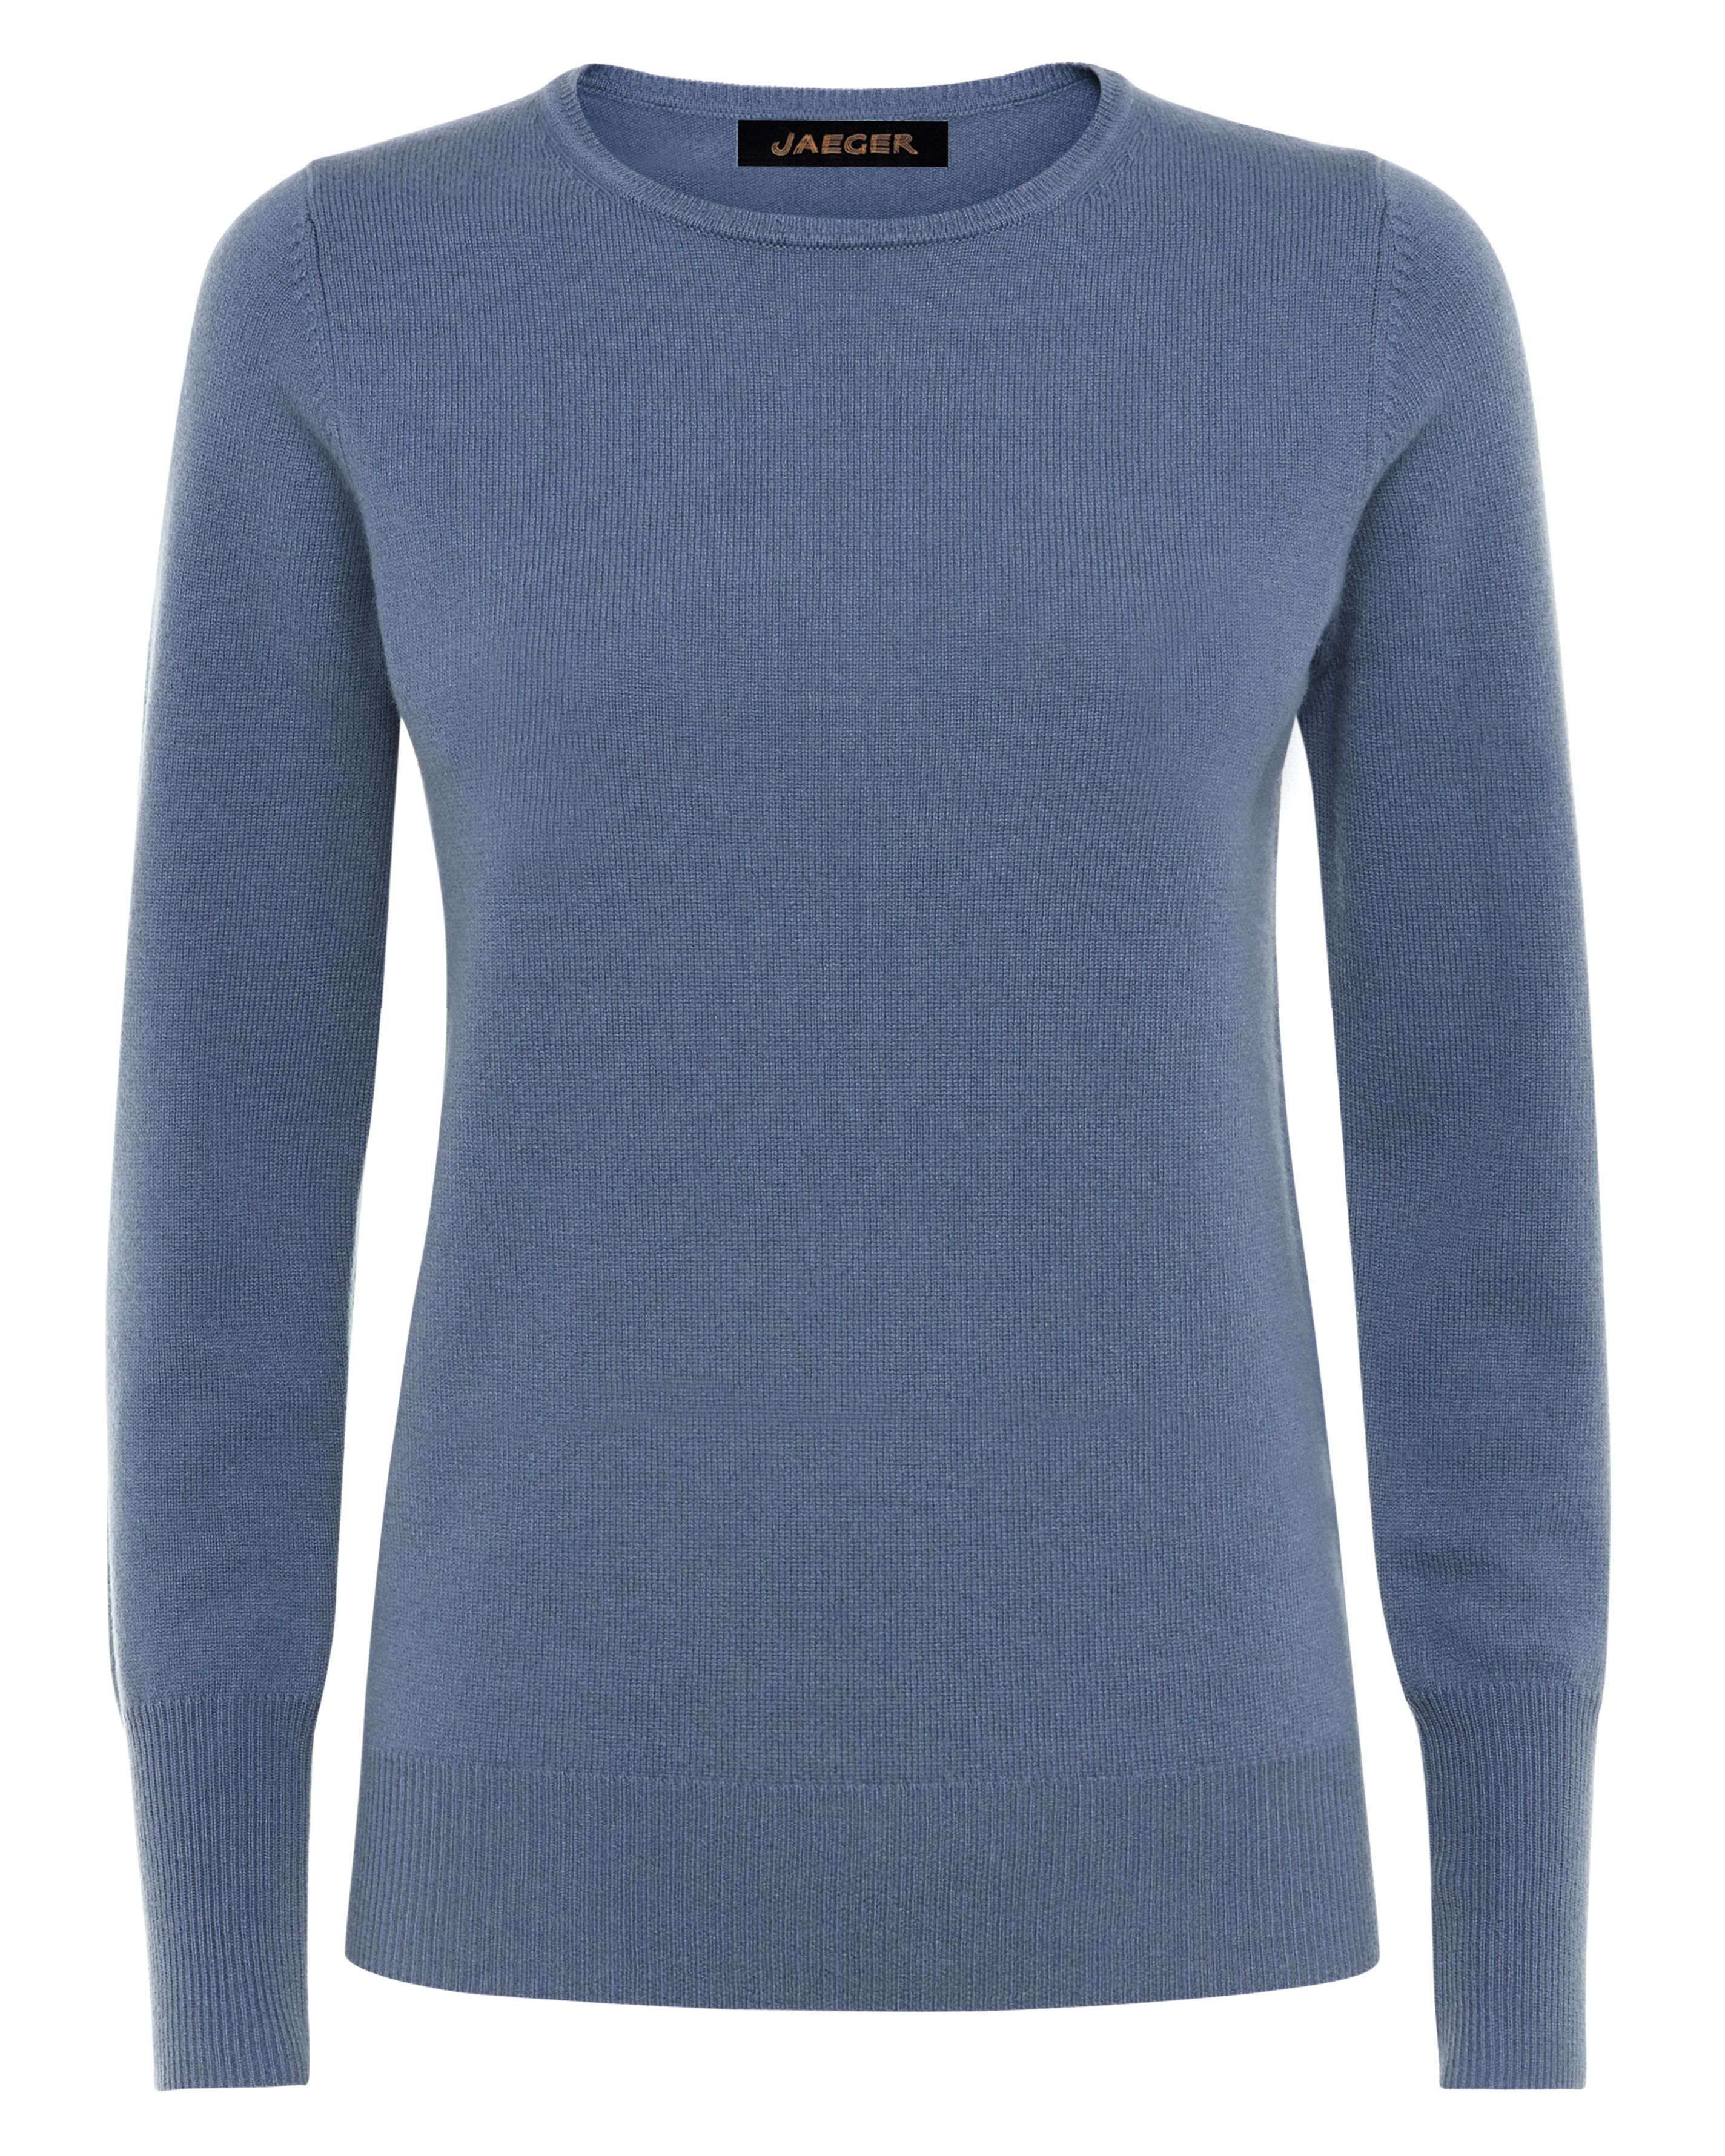 Jaeger Cashmere Crew Neck Sweater in Blue (Airforce Blue) | Lyst